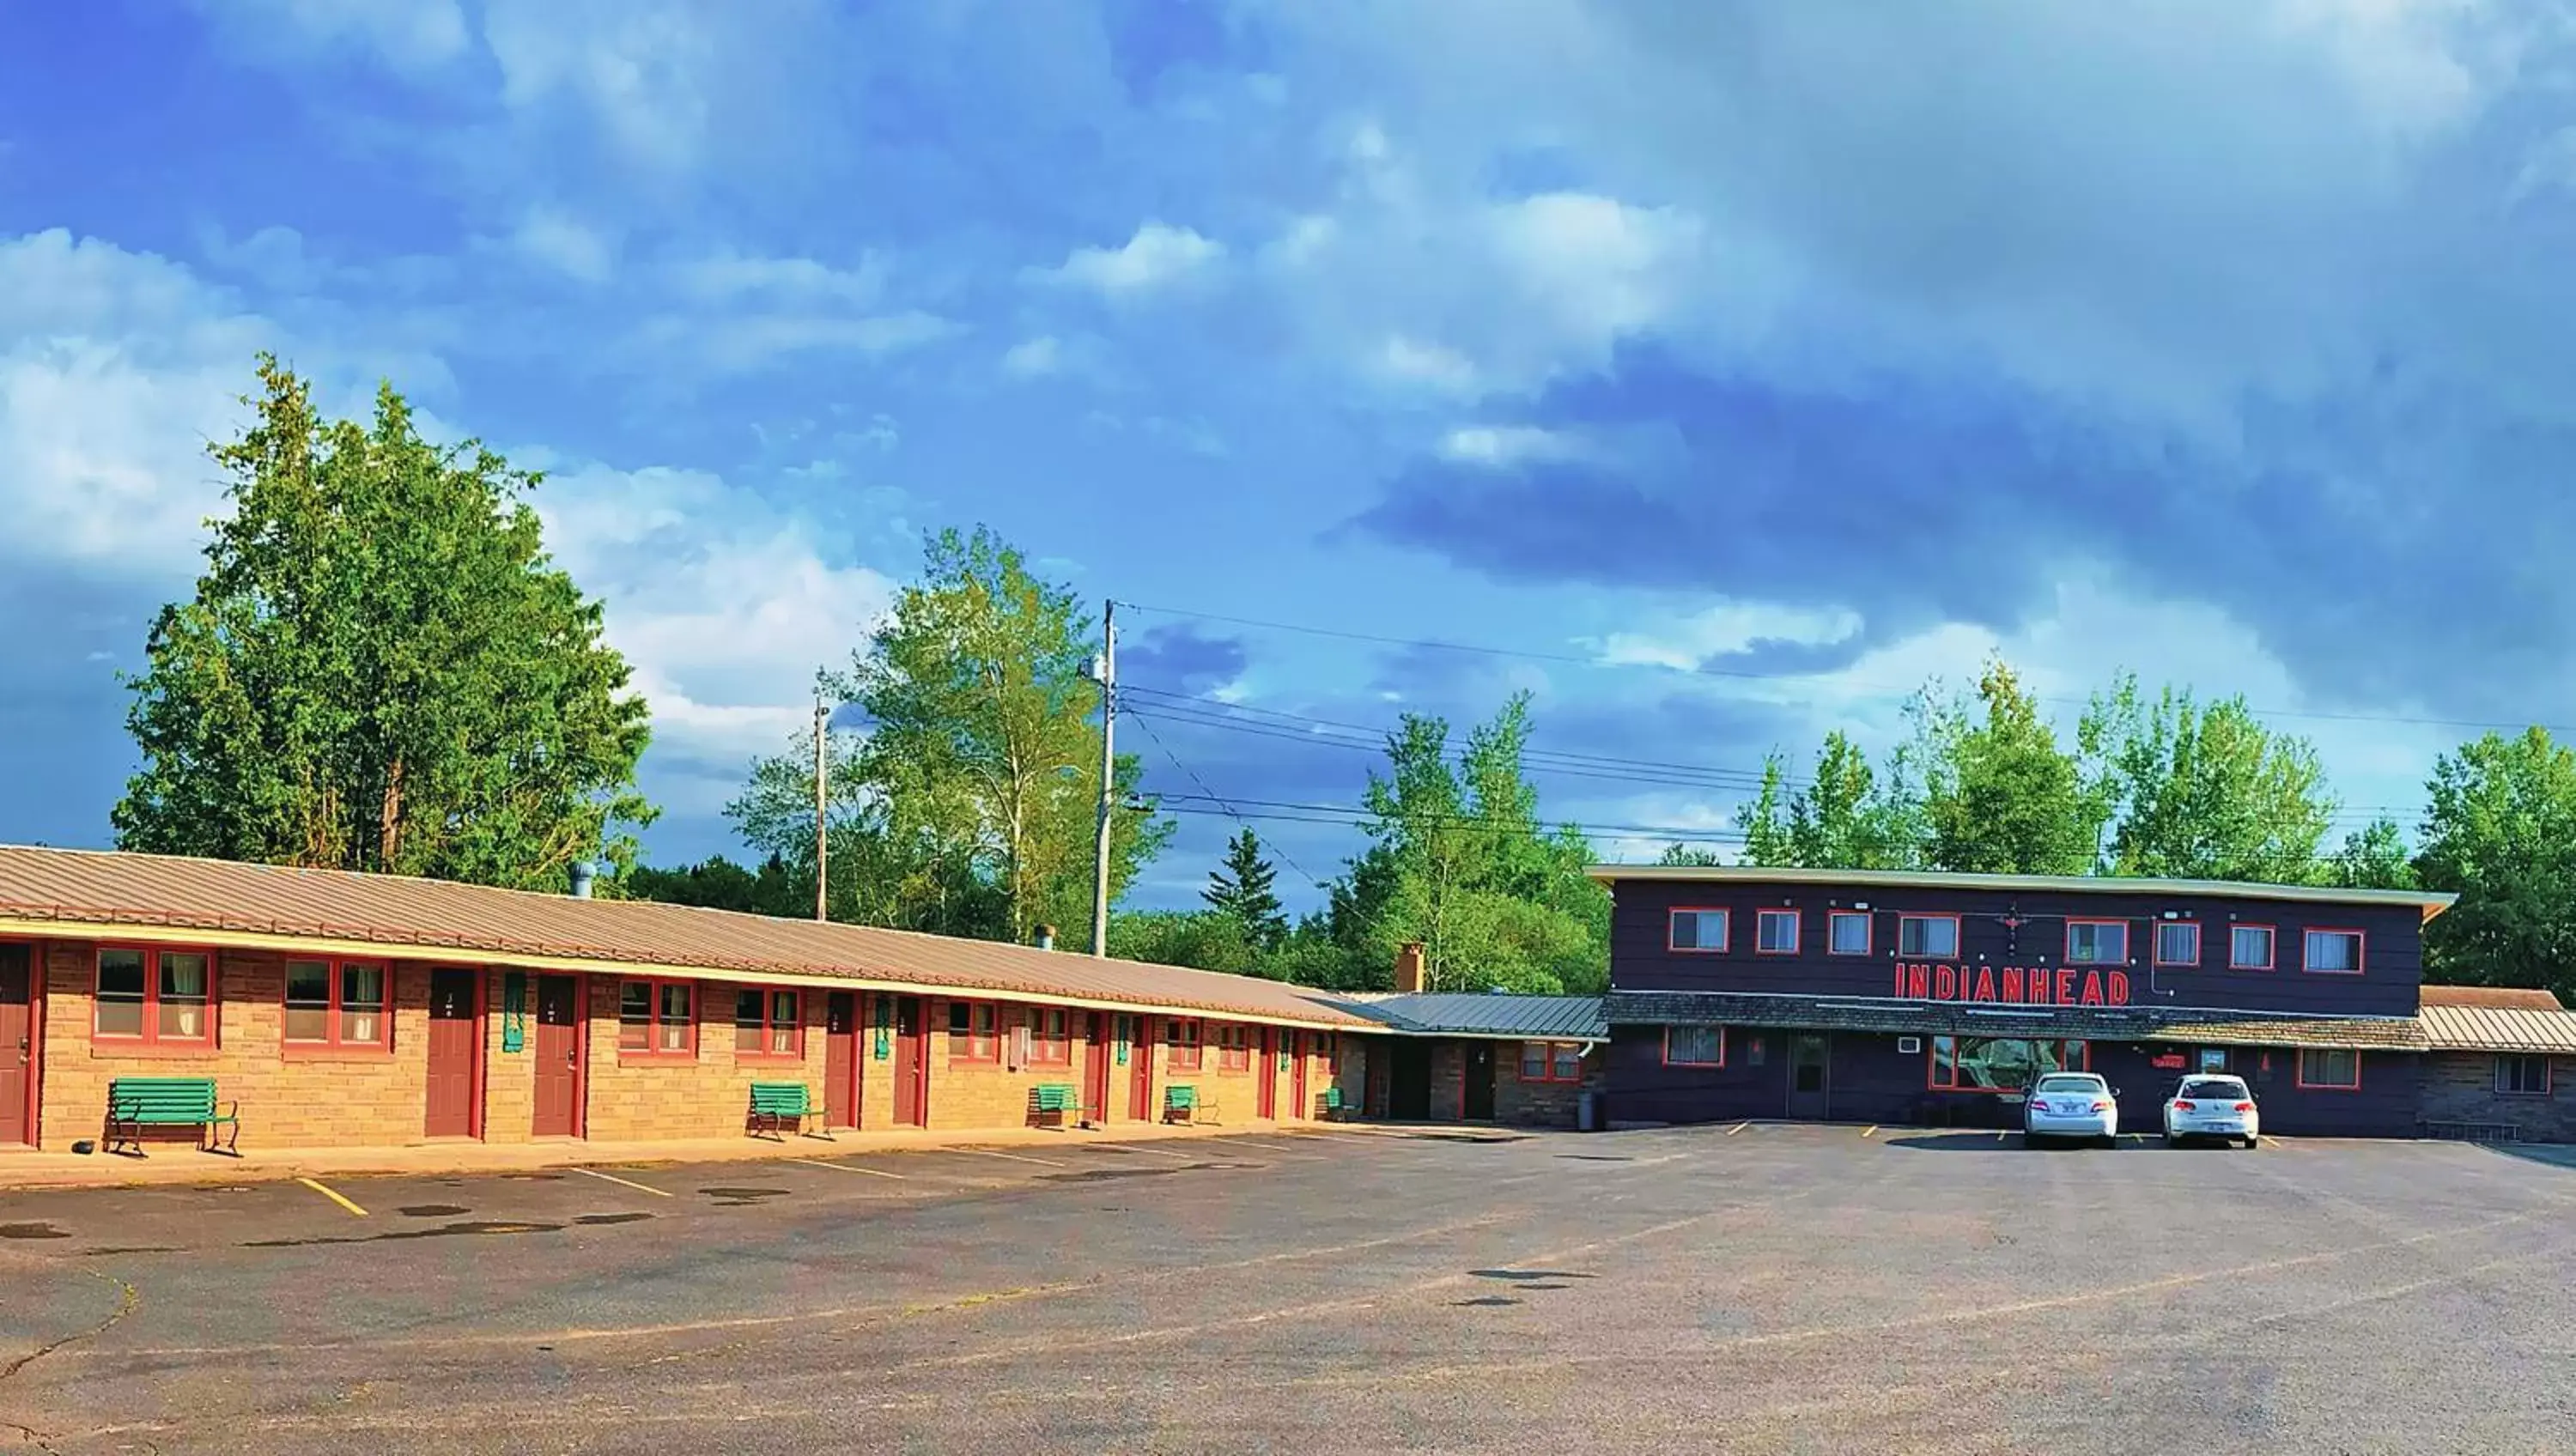 Property Building in Indianhead Ironwood Hotel